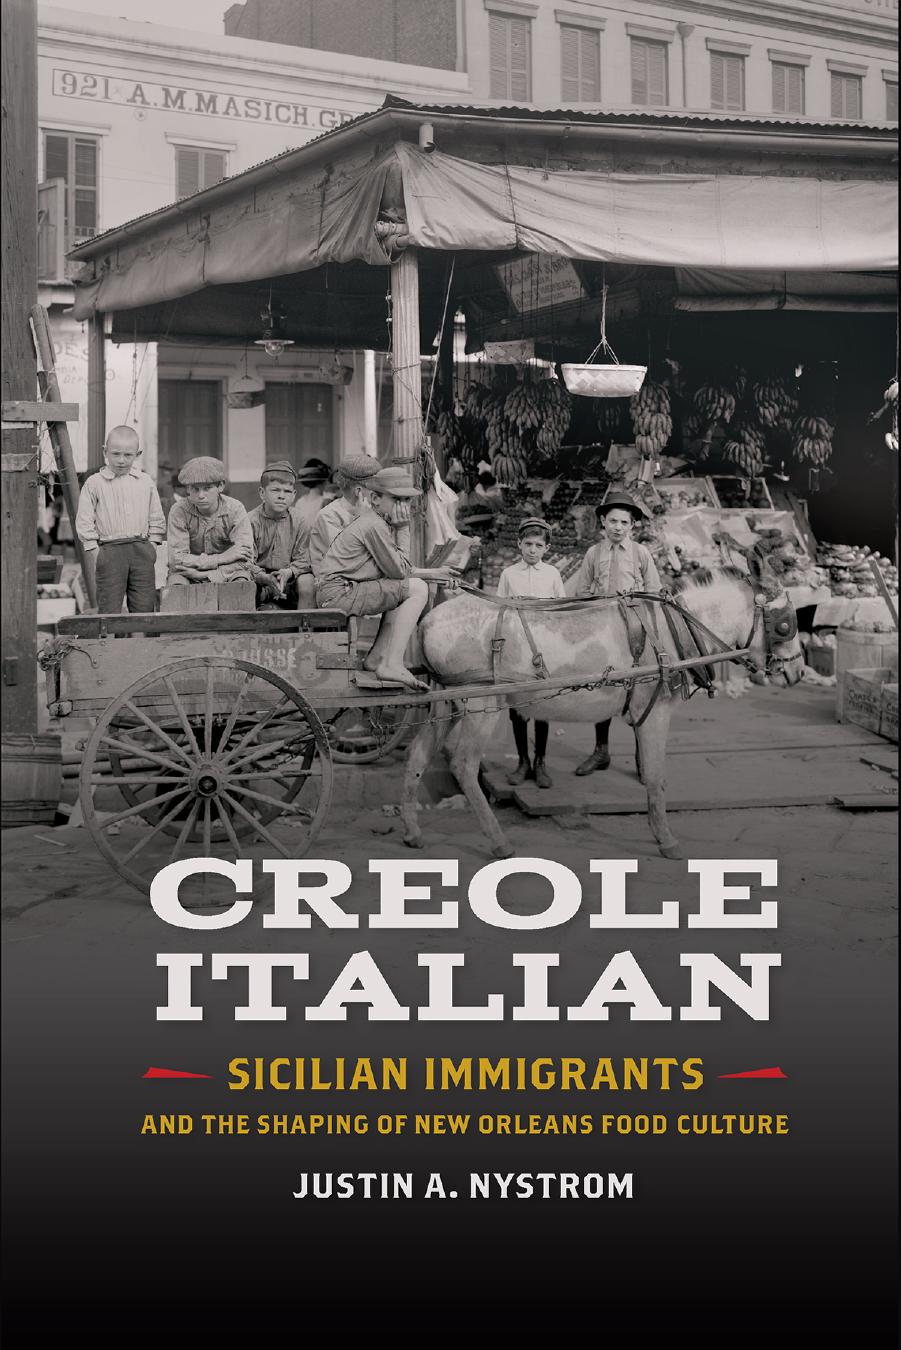 Creole Italian: Sicilian Immigrants and the Shaping of New Orleans Food Culture by Justin A. Nystrom